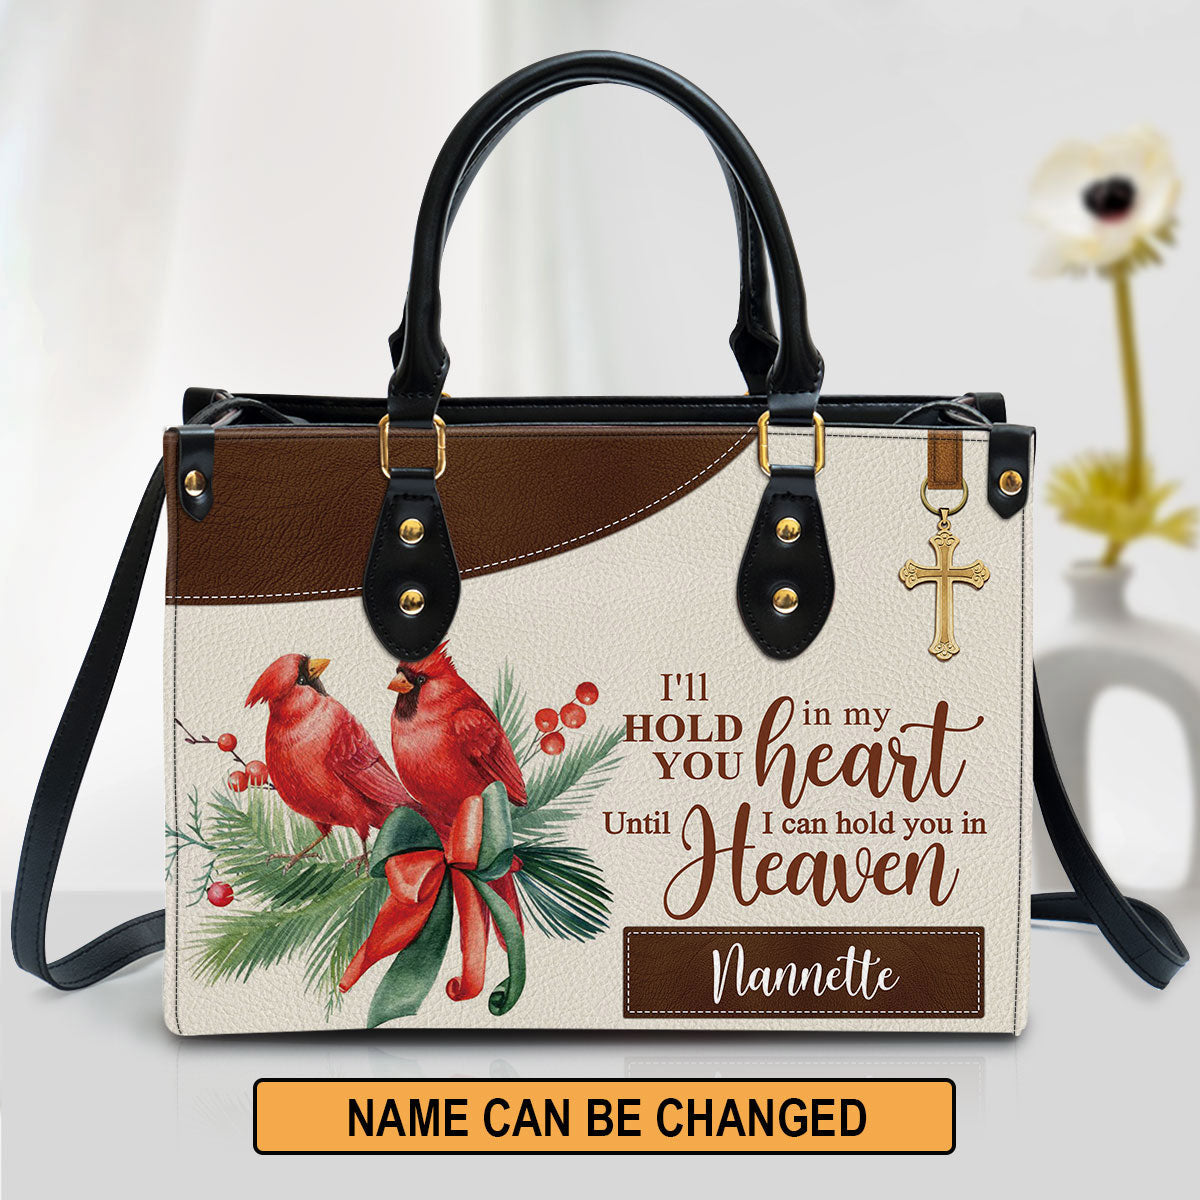 Personalized Cardinal Bird Leather Handbag - I‘ll Hold You In My Heart Leather Bag - Gifts For Women Of God